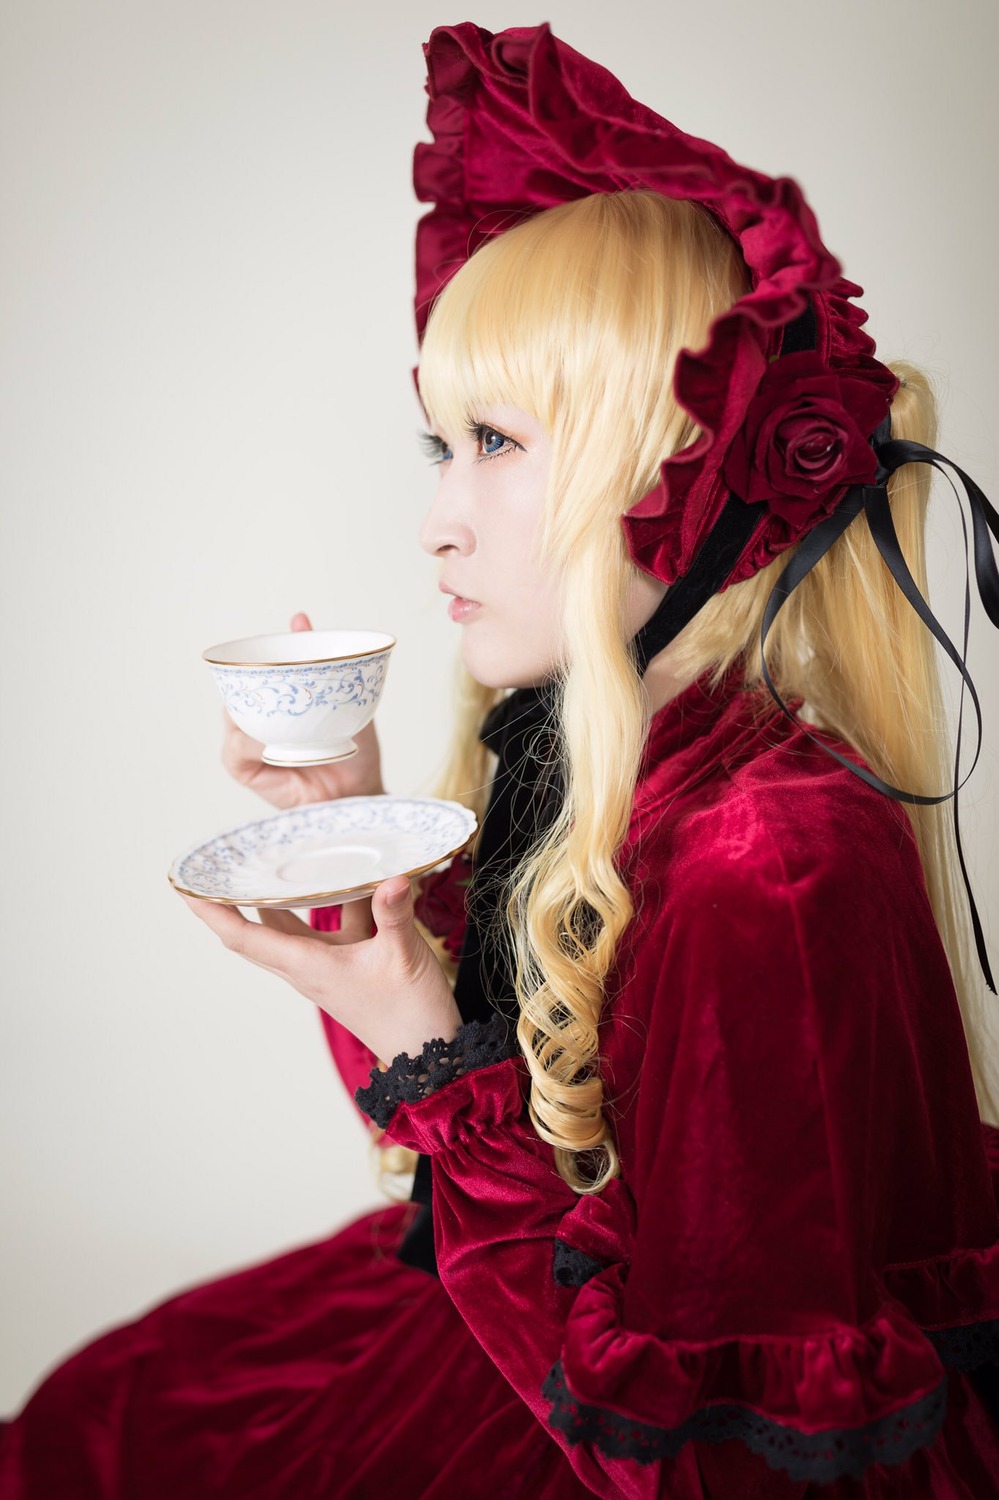 1girl blonde_hair blue_eyes bonnet bow cup dress flower holding holding_cup lips long_hair profile realistic red_dress ribbon rose saucer shinku solo tea teacup